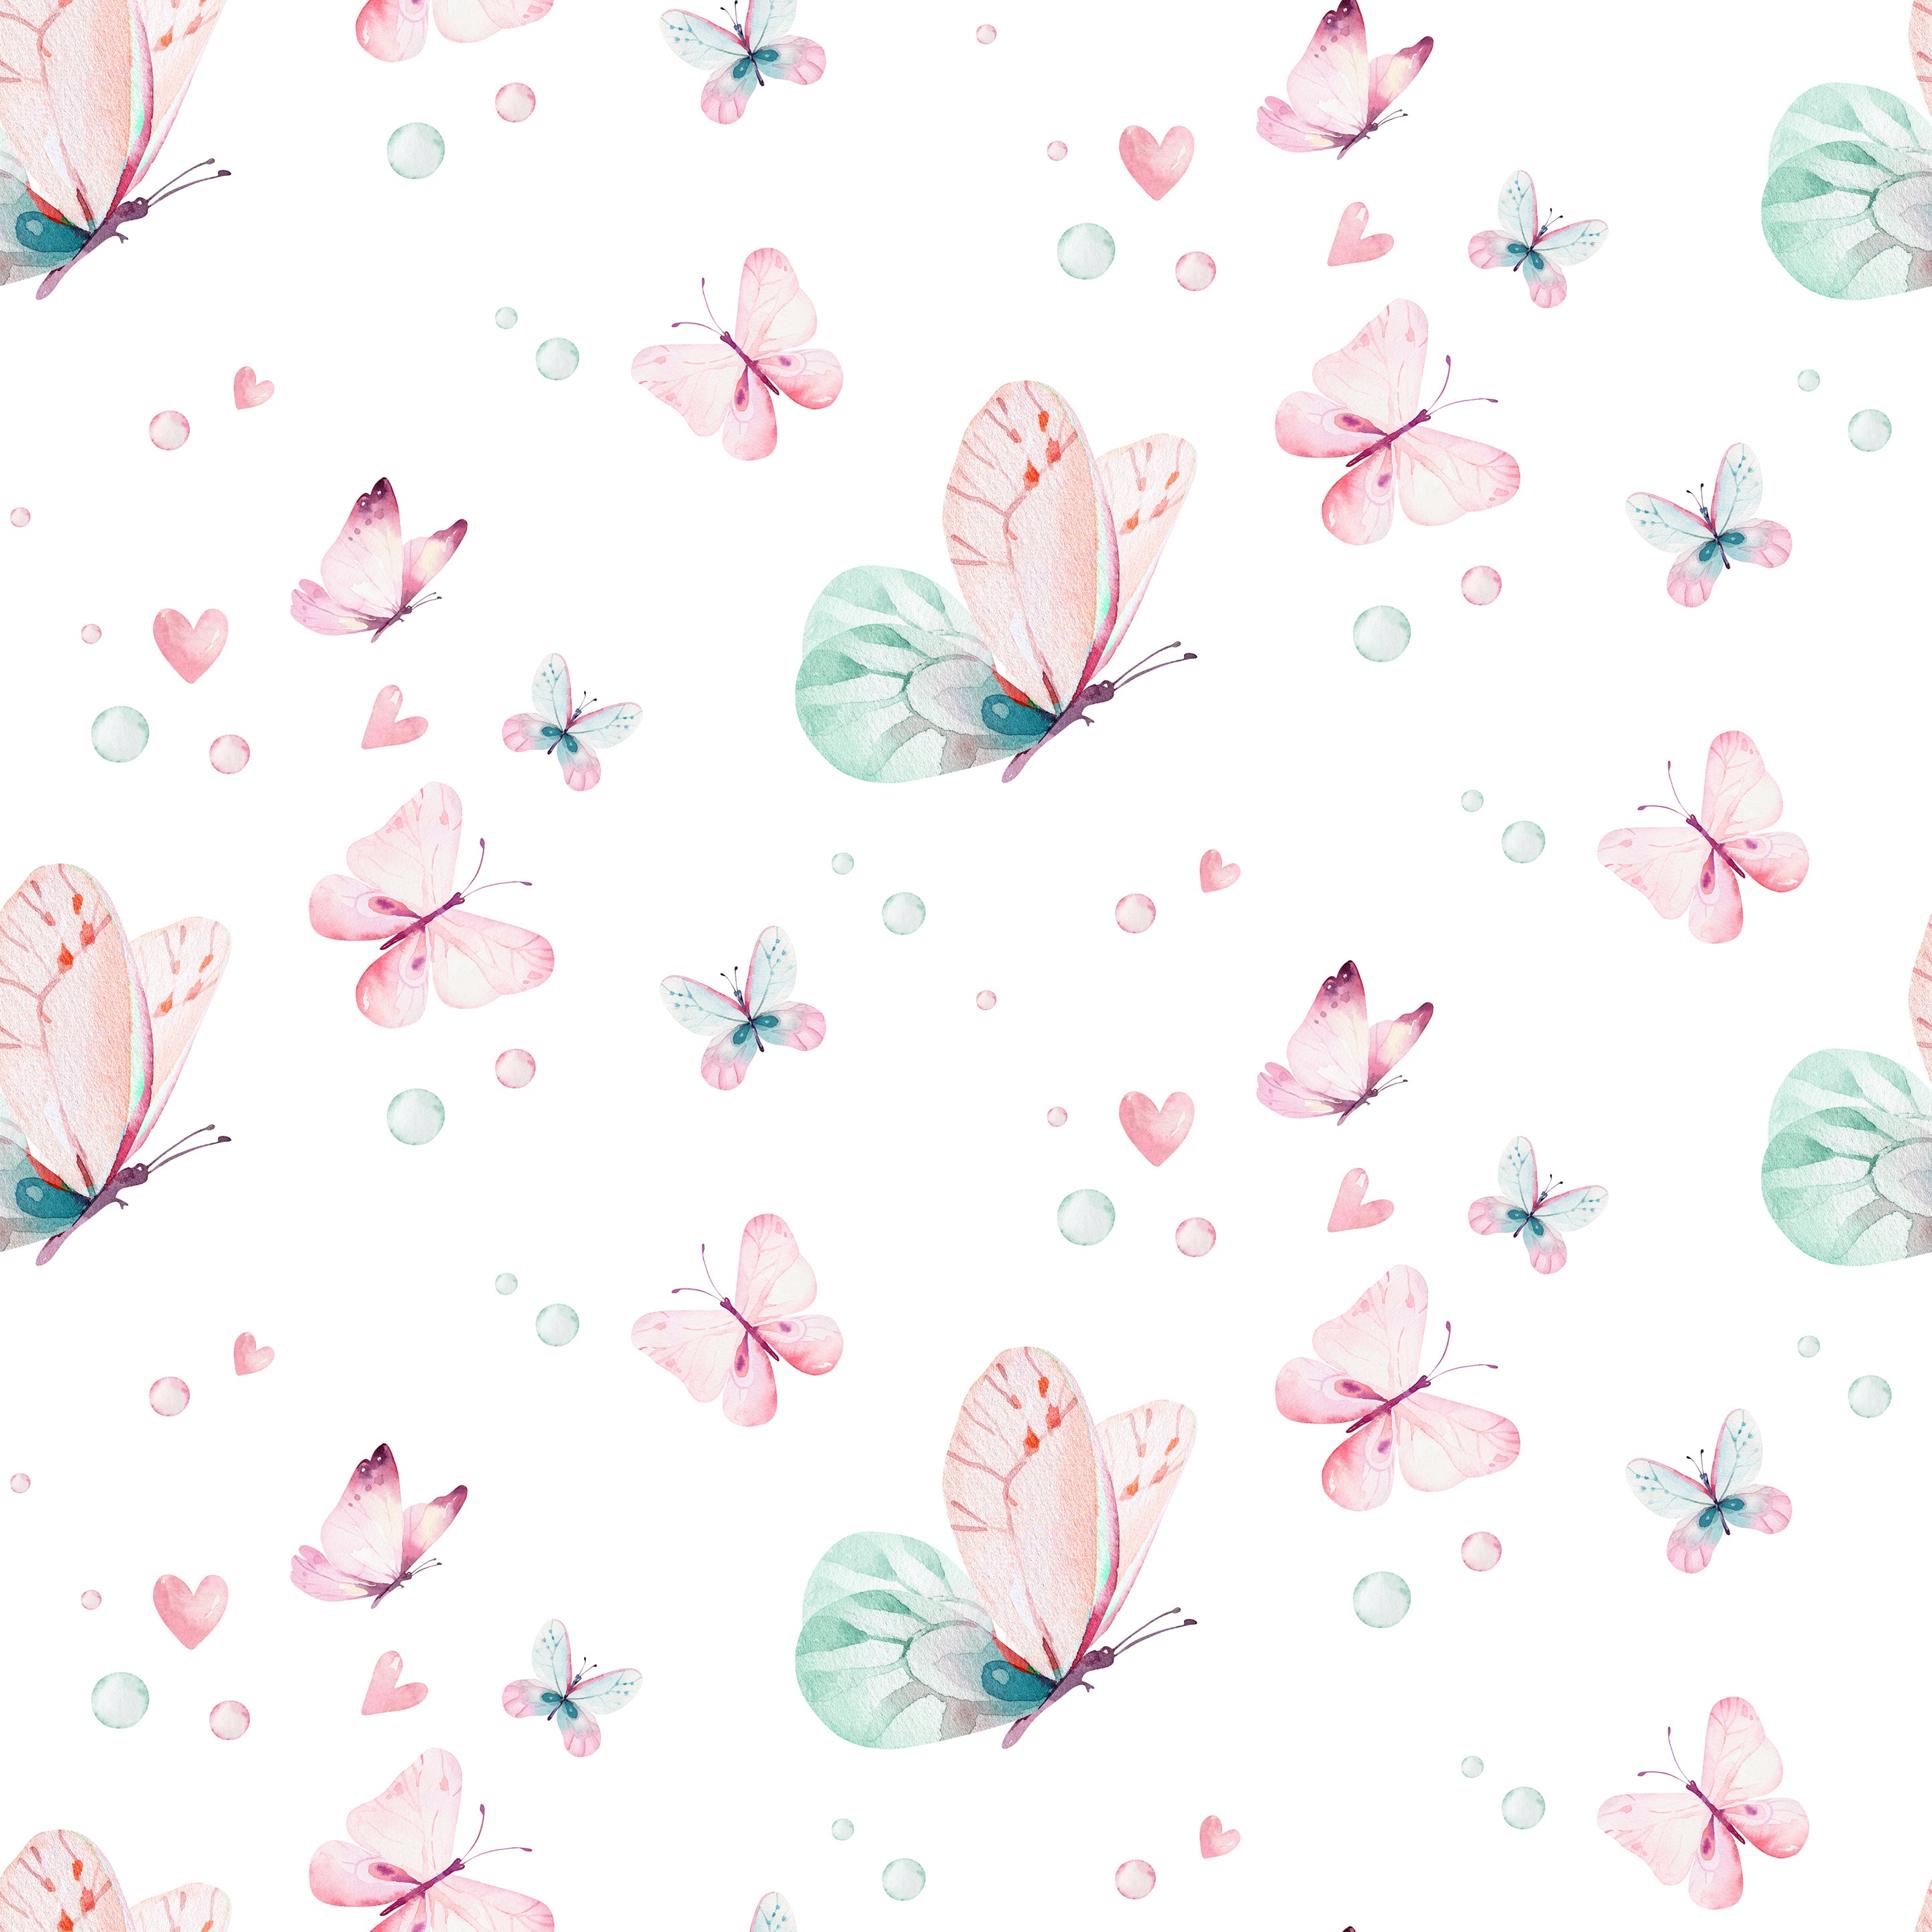 Detailed view of 'Fairy and Flowers III' wallpaper featuring an array of gentle butterflies and floral designs. The butterflies, in shades of pink and teal, flutter amidst scattered hearts and soft green leaves, all set against a crisp white background, creating a light and airy feel